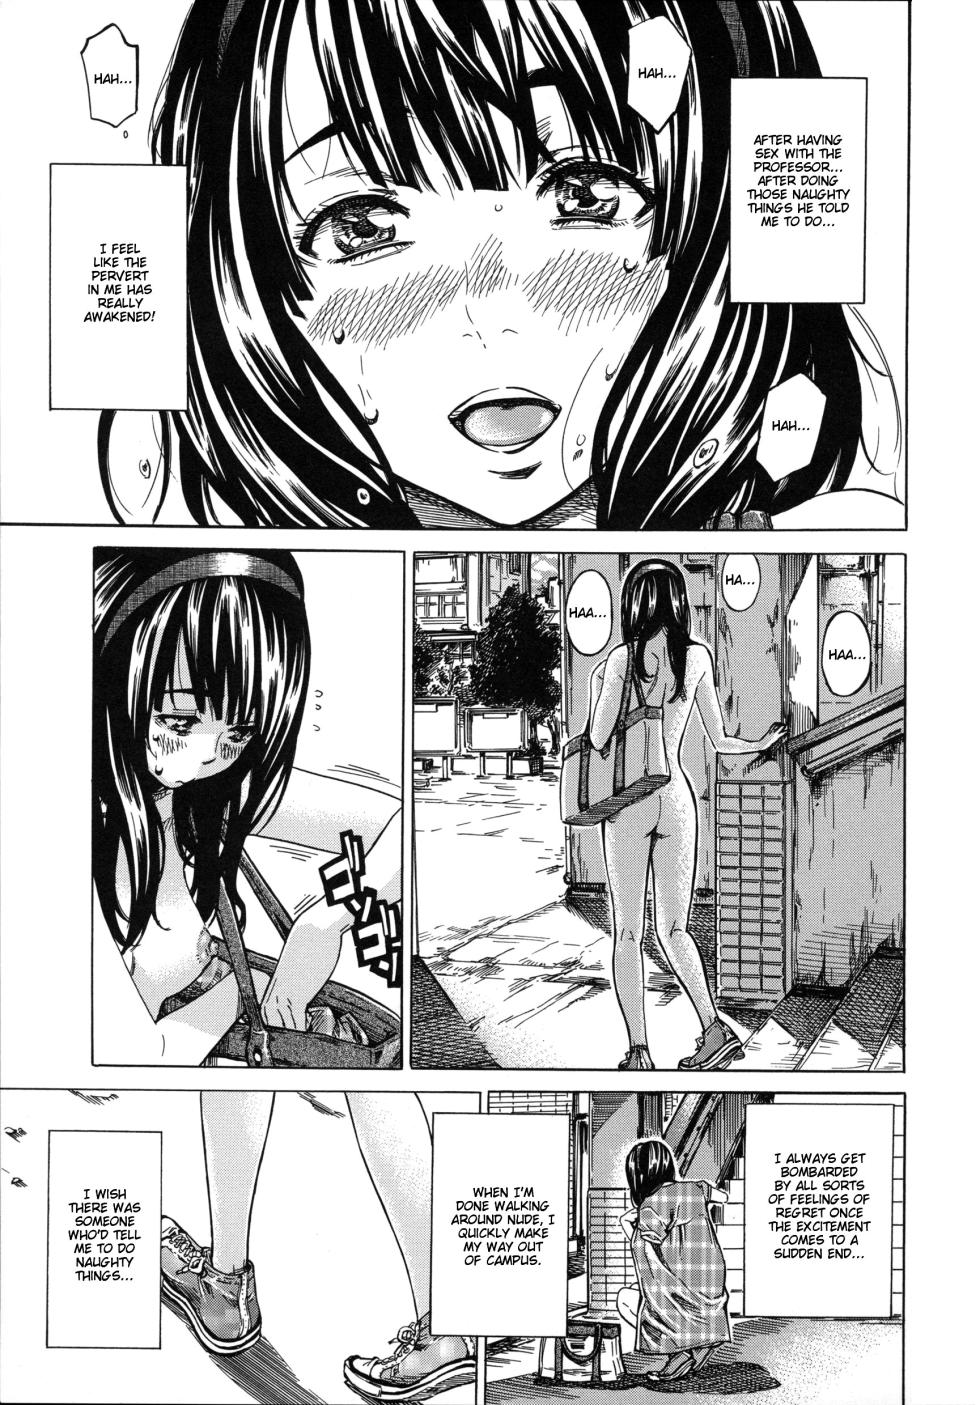 [Maruta]Miki Kashiwazaki Goes Naked in All Sorts of Places (English) - Page 34